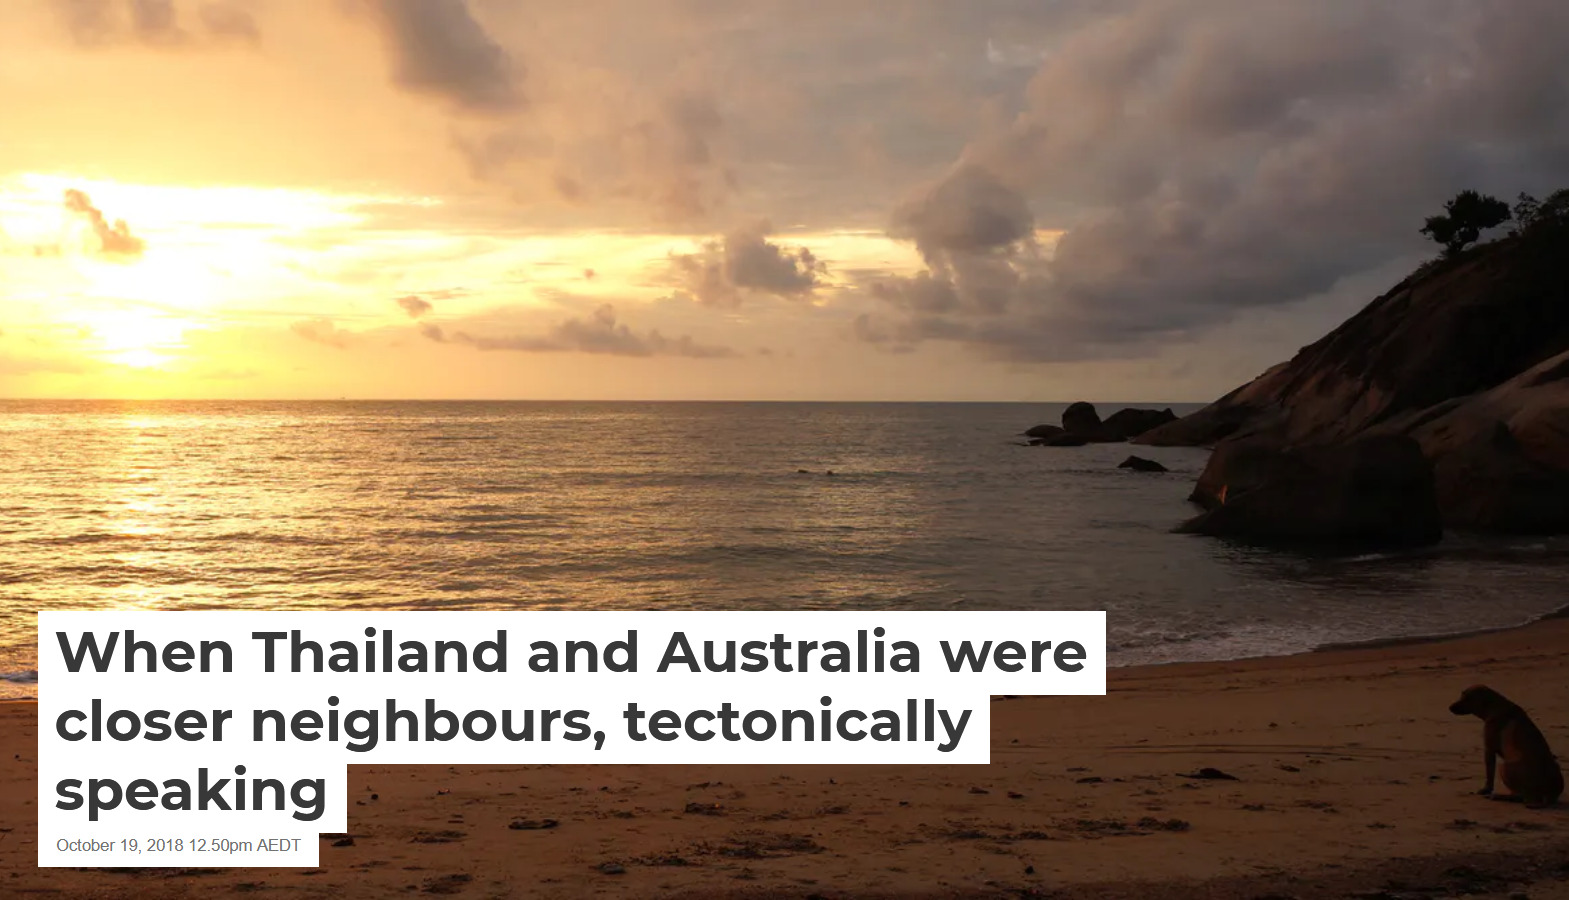 When Thailand and Australia were closer neighbours, tectonically speaking